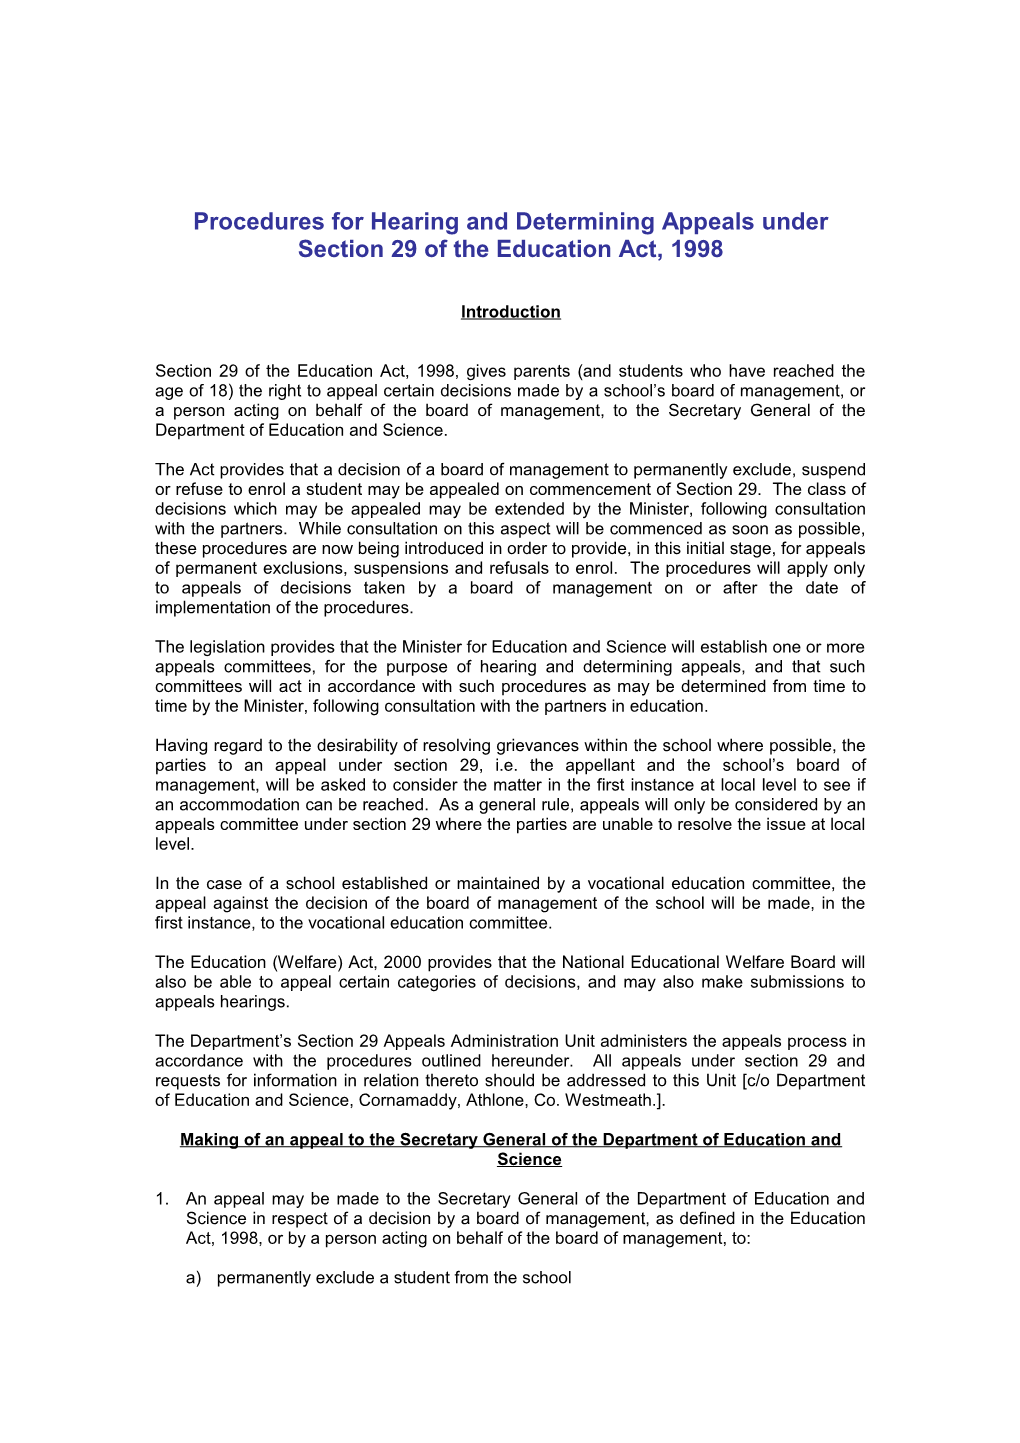 Procedures for Hearing and Determining Appeals Under Section 29 of the Education Act, 1998